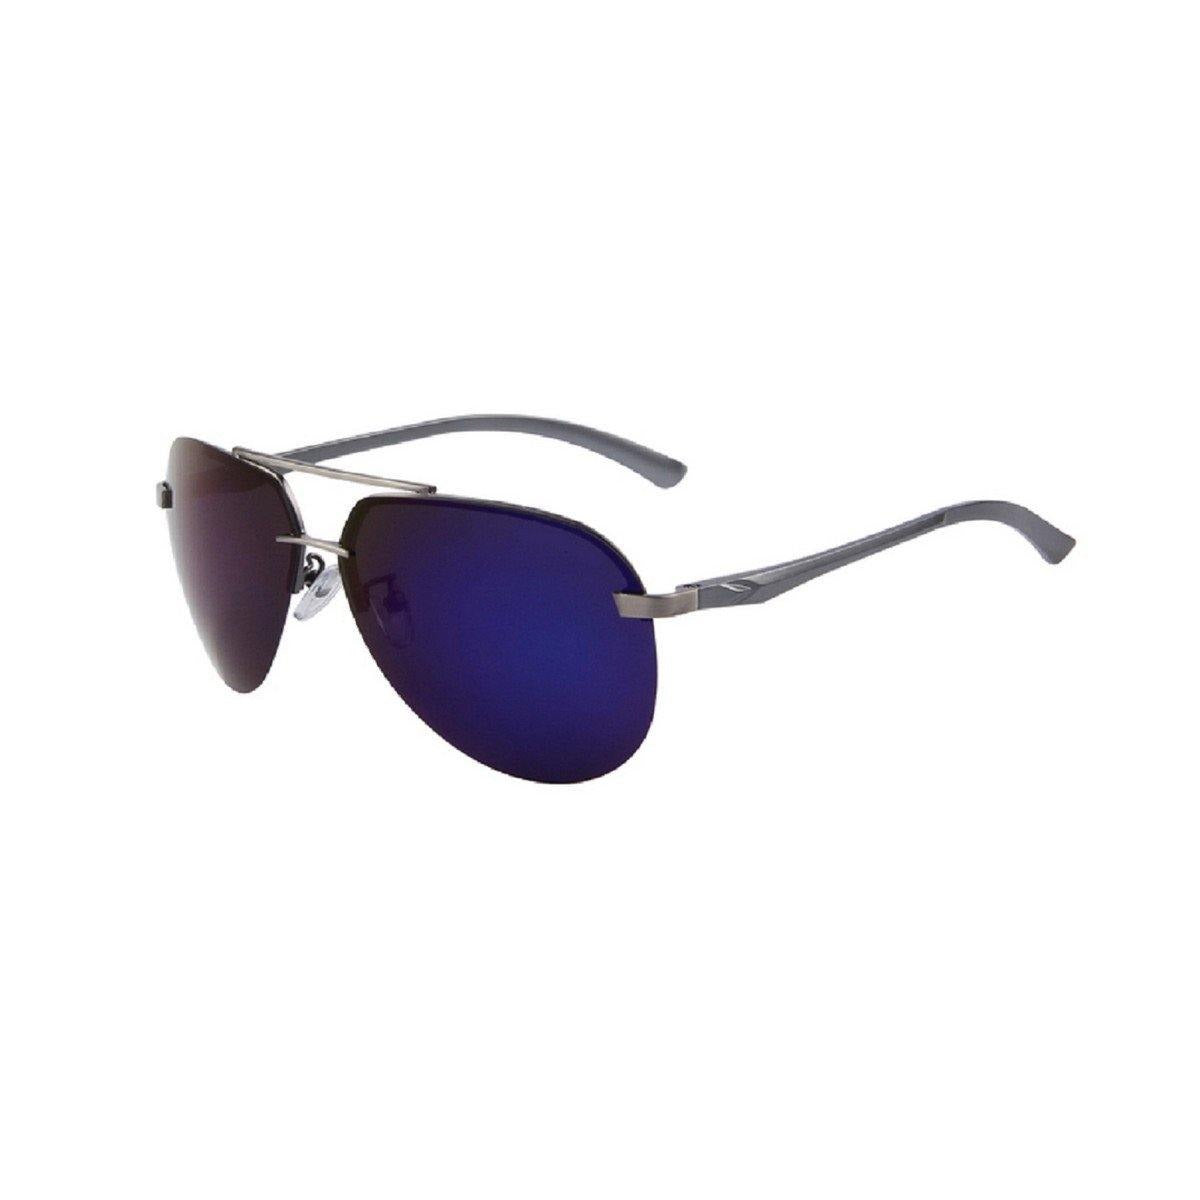 Buy HD Vision Blue Mirror Polarized Aviator Sunglasses - Glasses India Online in India